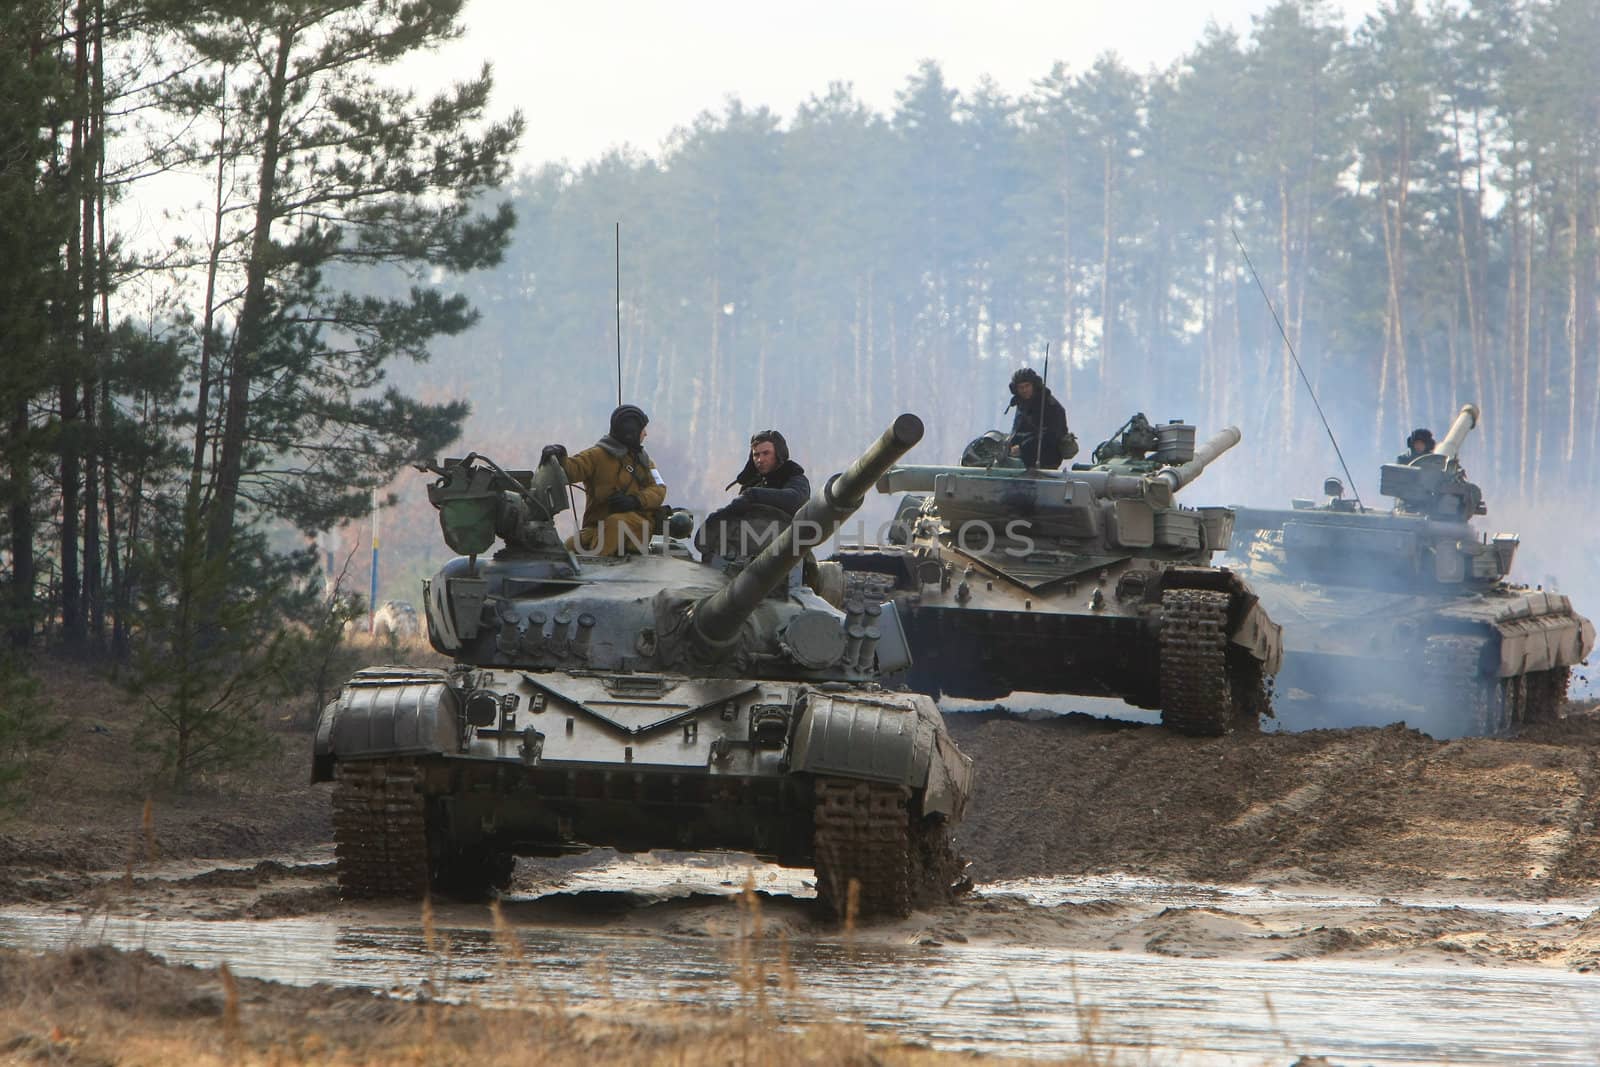 Three tanks in a forest